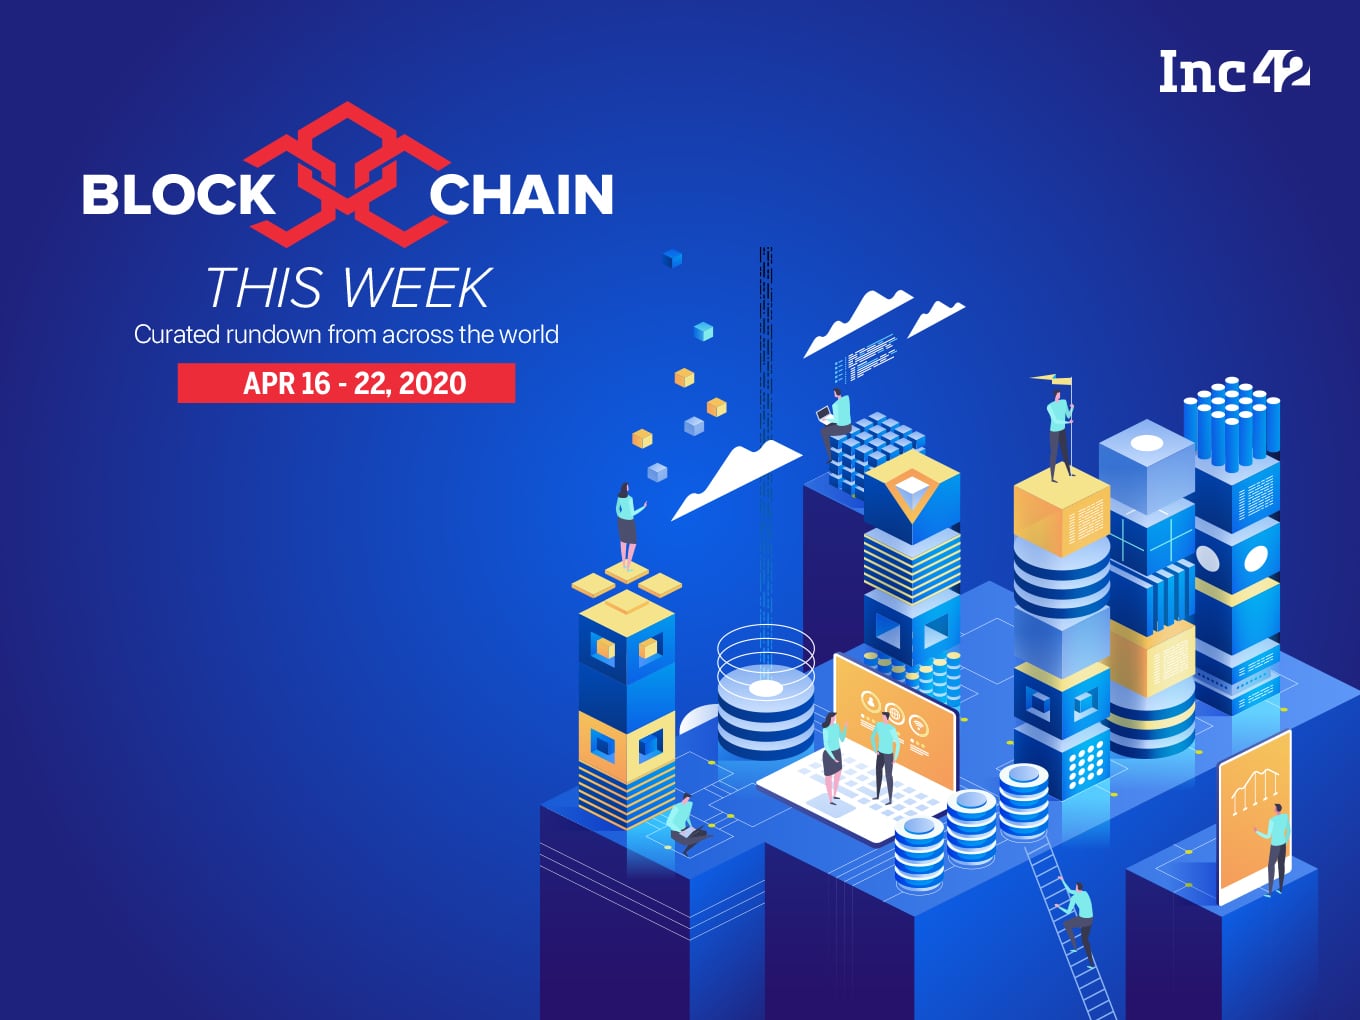 Blockchain This Week: Will Reliance Jio, Facebook Partnership Accelerate Blockchain Adoption In India & More